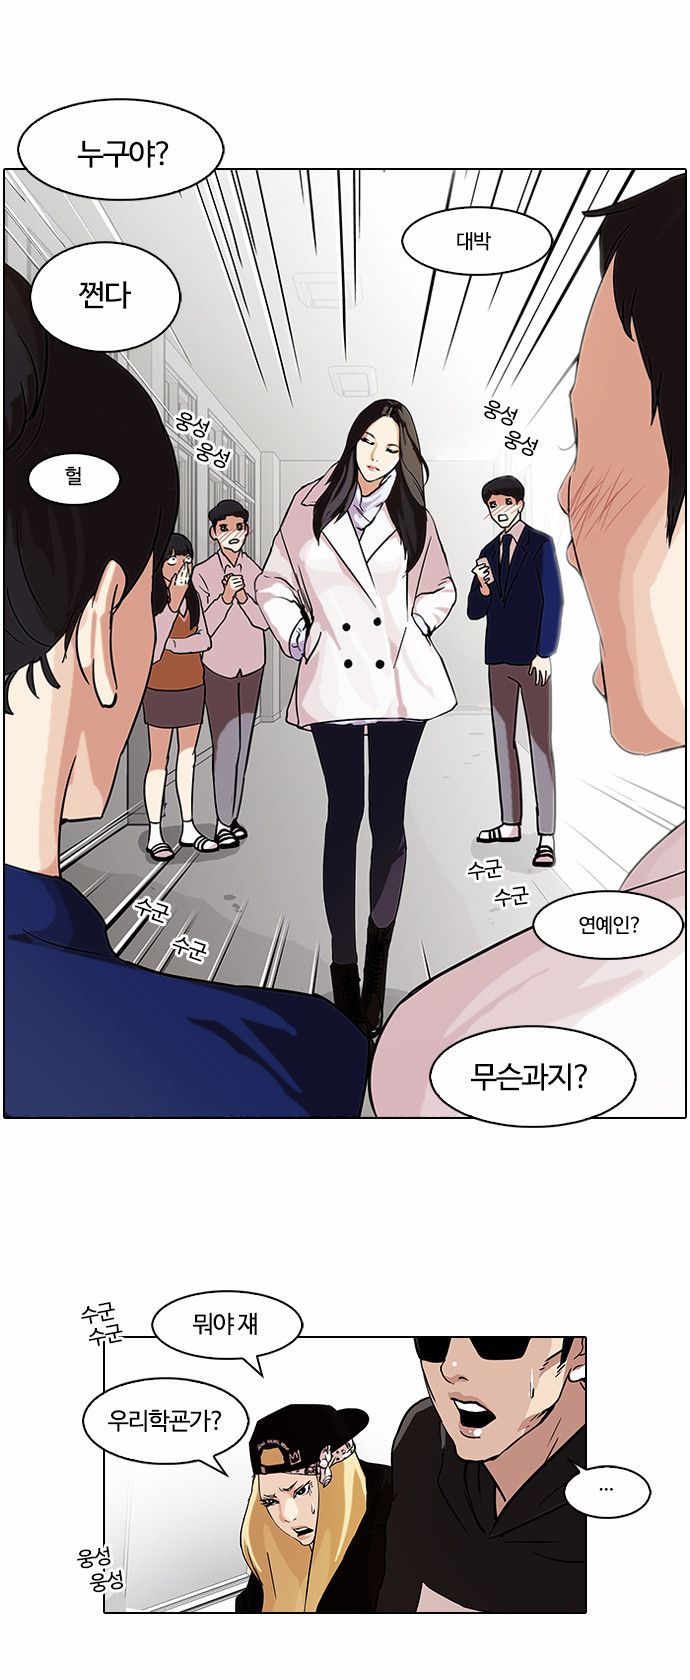 Lookism - Chapter 62 - Page 2